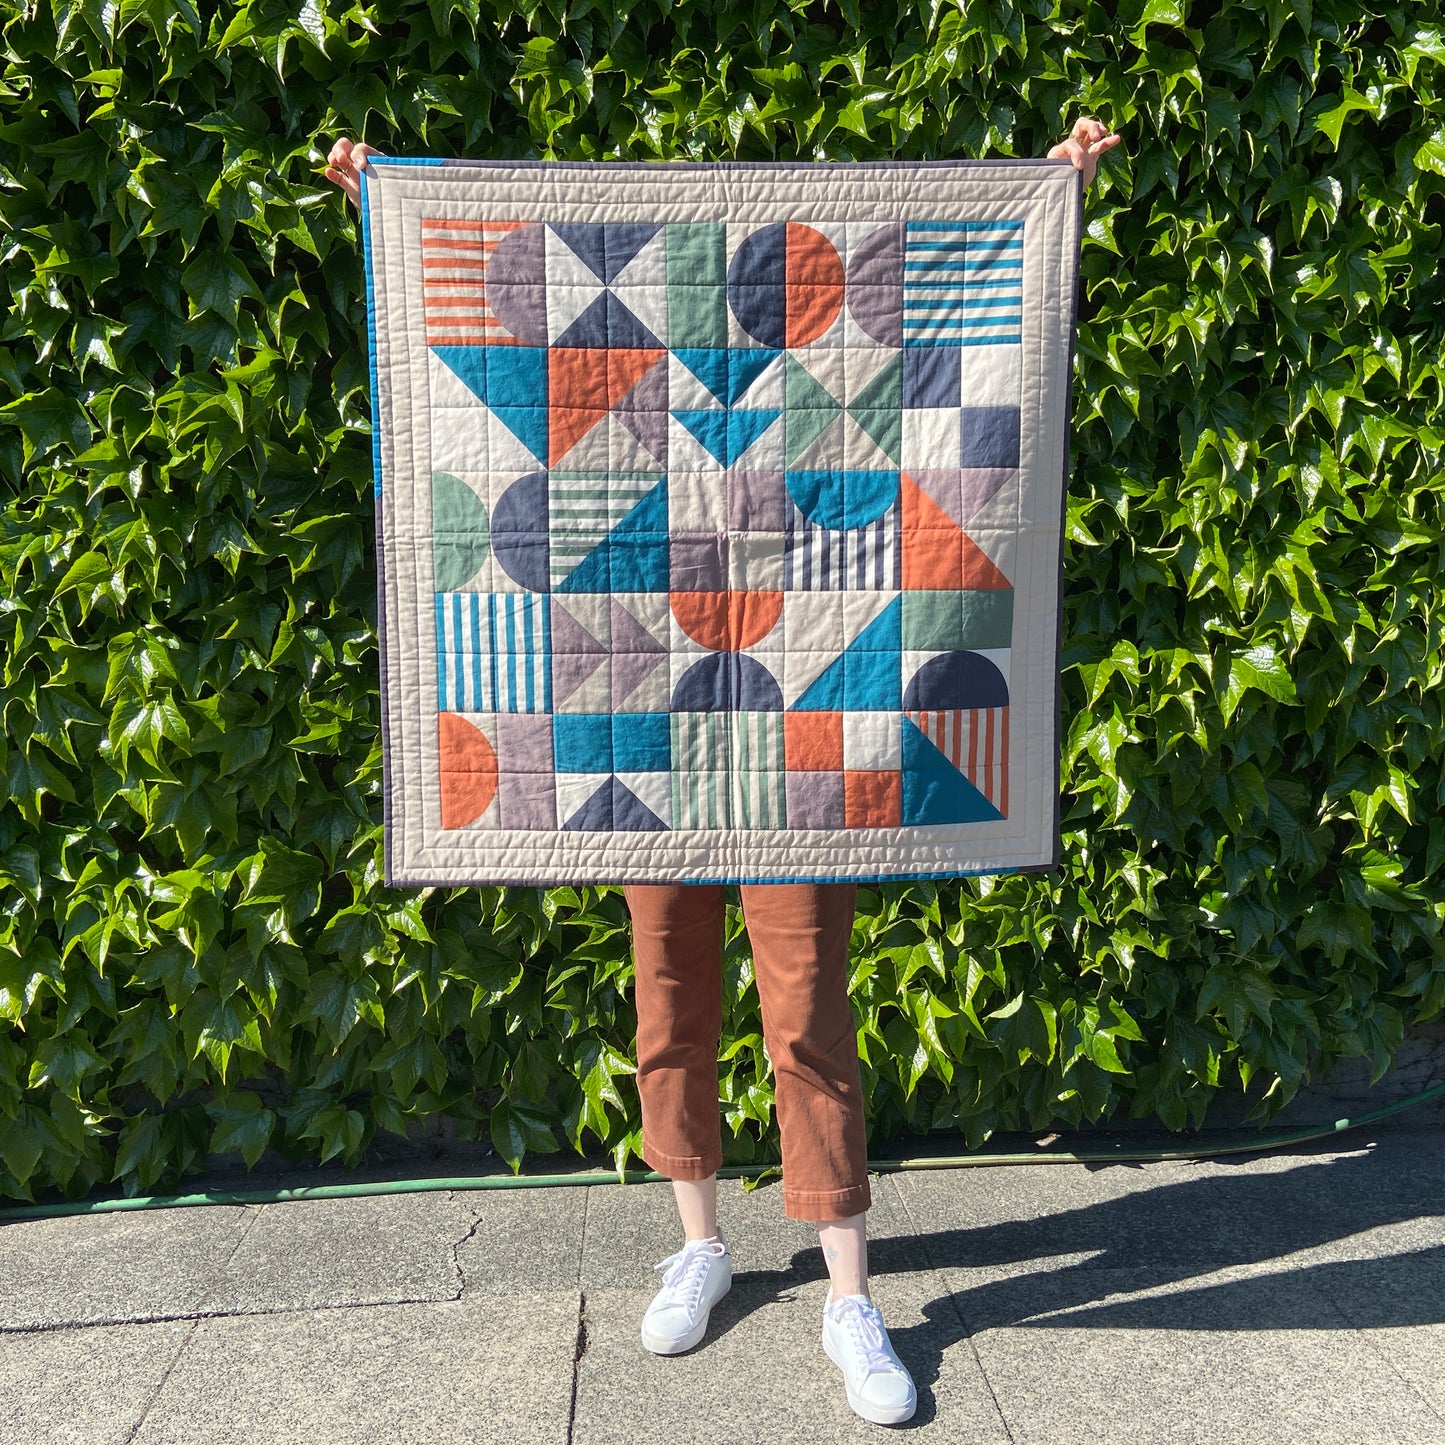 Modern Sampler Quilt in Bold Muted Colors